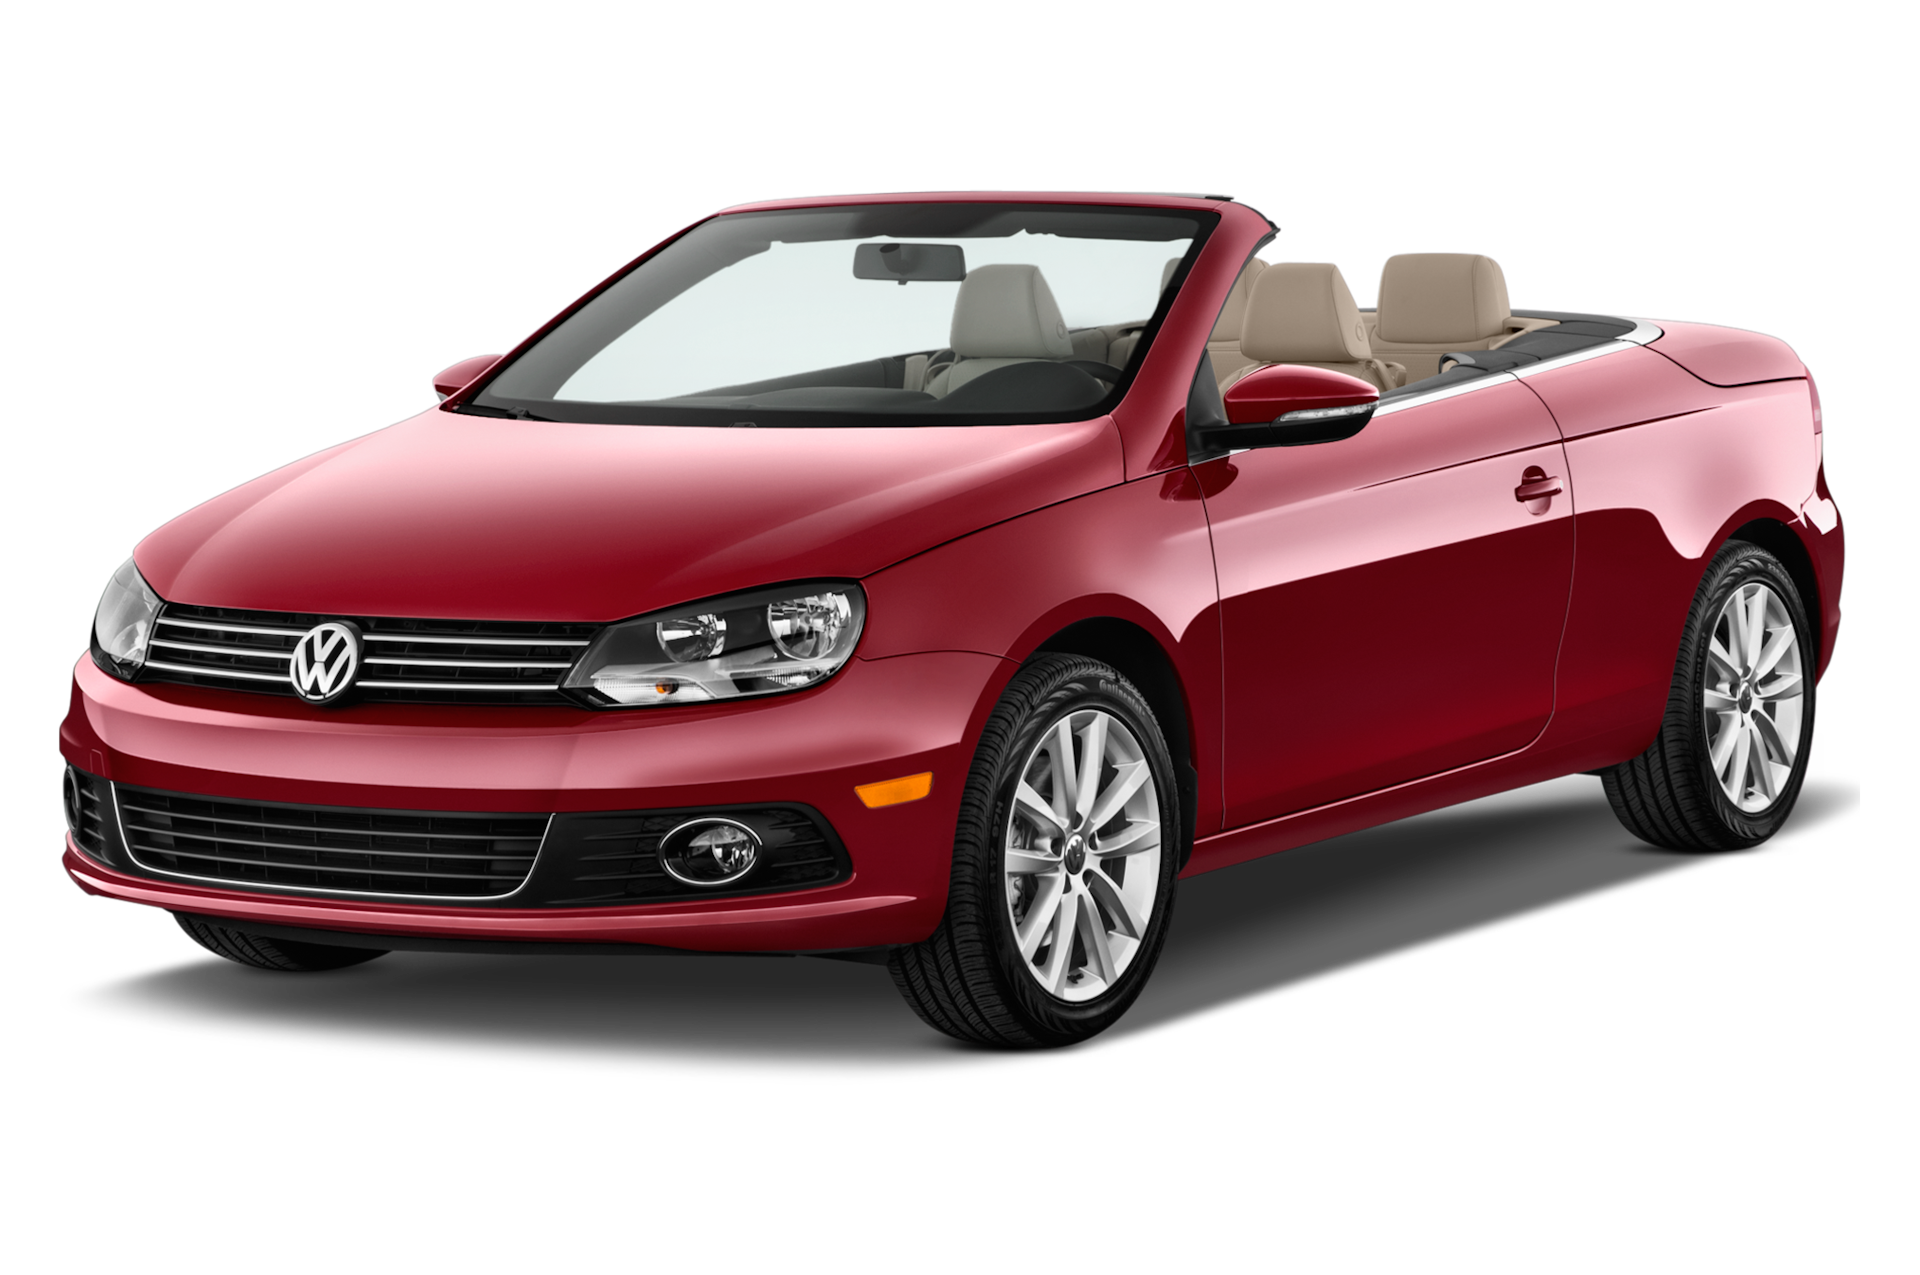 2013 Volkswagen Eos Prices, Reviews, and Photos - MotorTrend